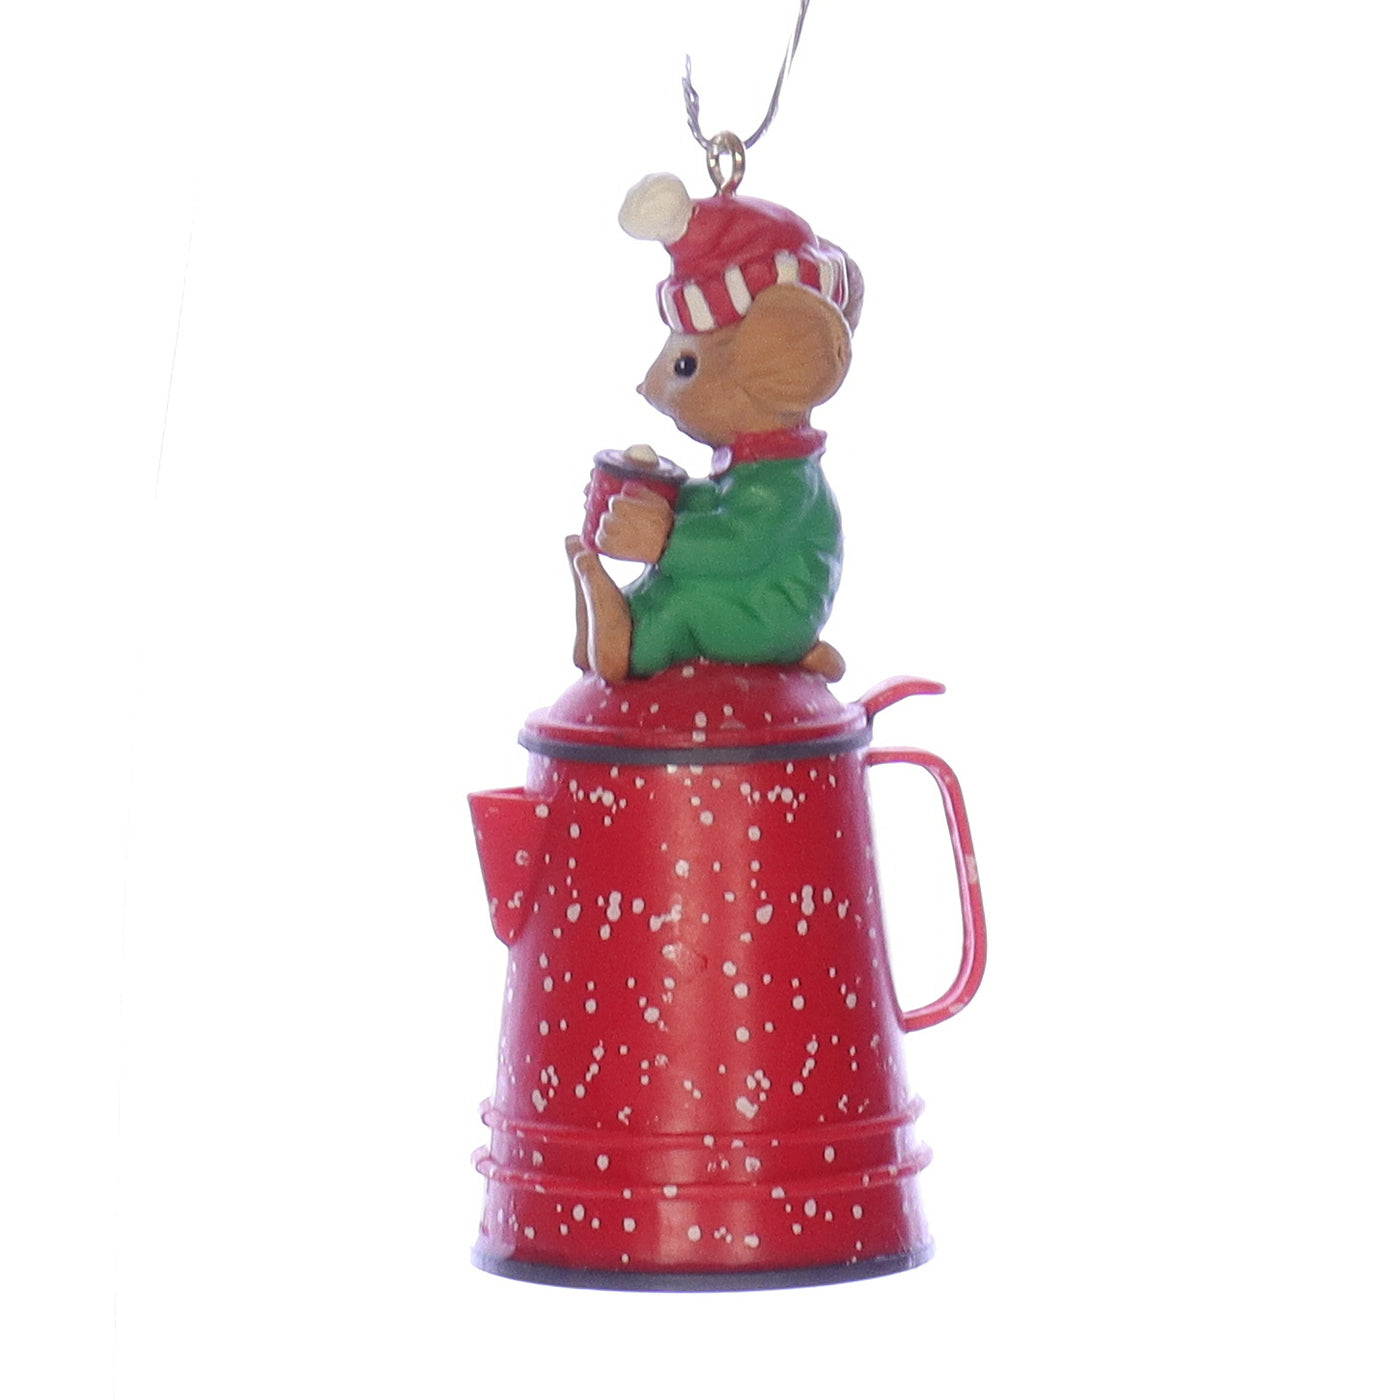 Enesco_Treasury_of_Christmas_Ornaments_564974_Brewing_Warm_Wishes_Mouse_Ornament_1991 Left Side View